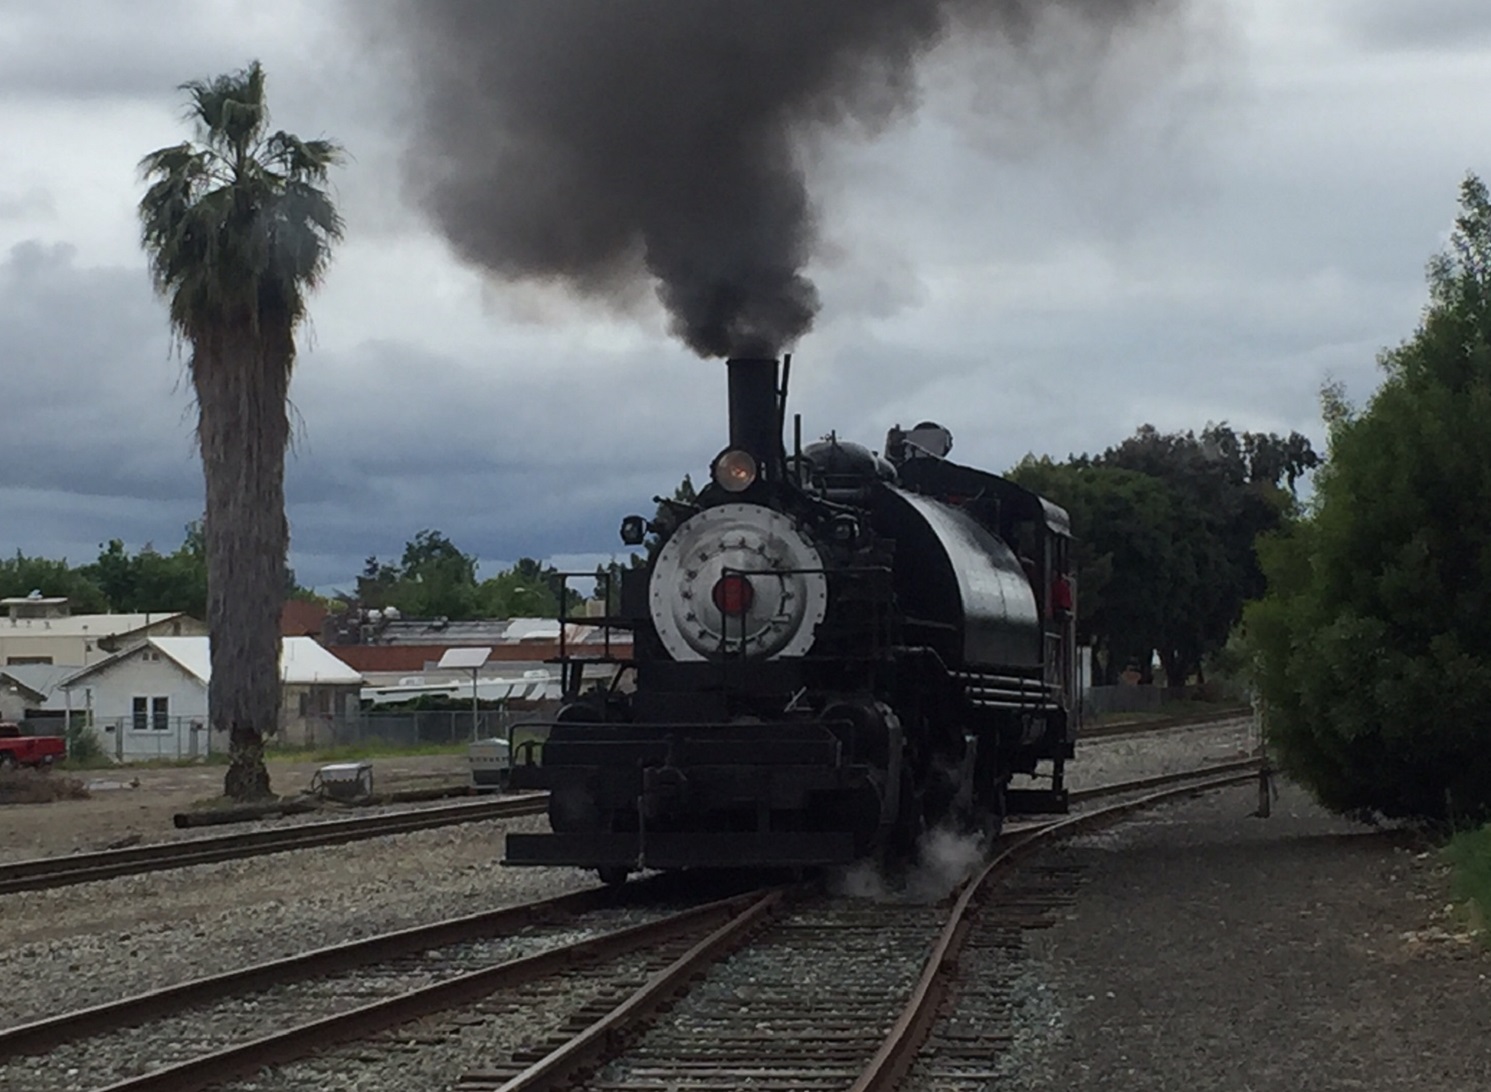 Double Steam Day On Niles Canyon Railway